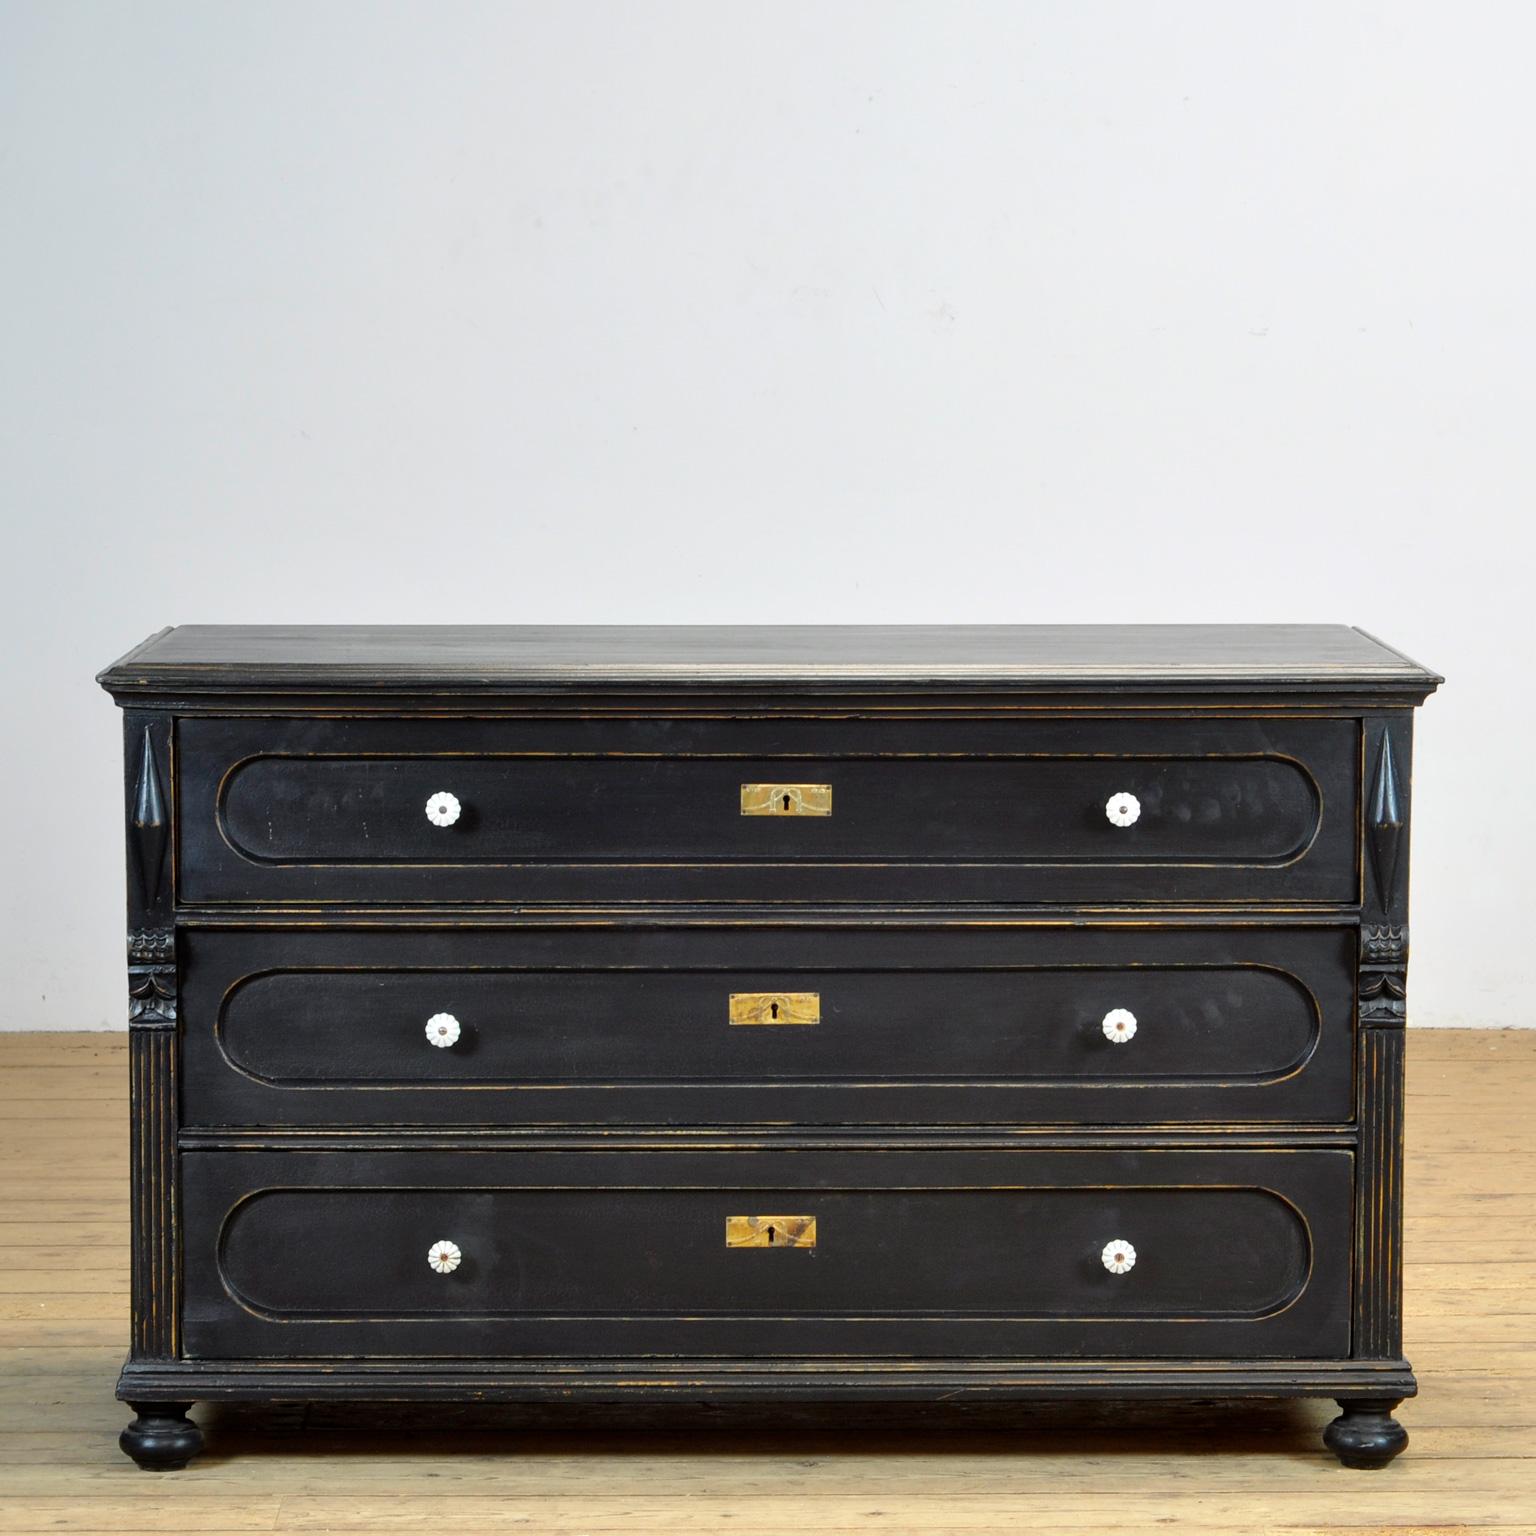 Chest of drawers made of pine and oak, made in France circa 1920. The drawers are made of pine.
The cabinet has 3 drawers which are made with dovetail joints. Al fittings are original.
Nice piece in good condition.